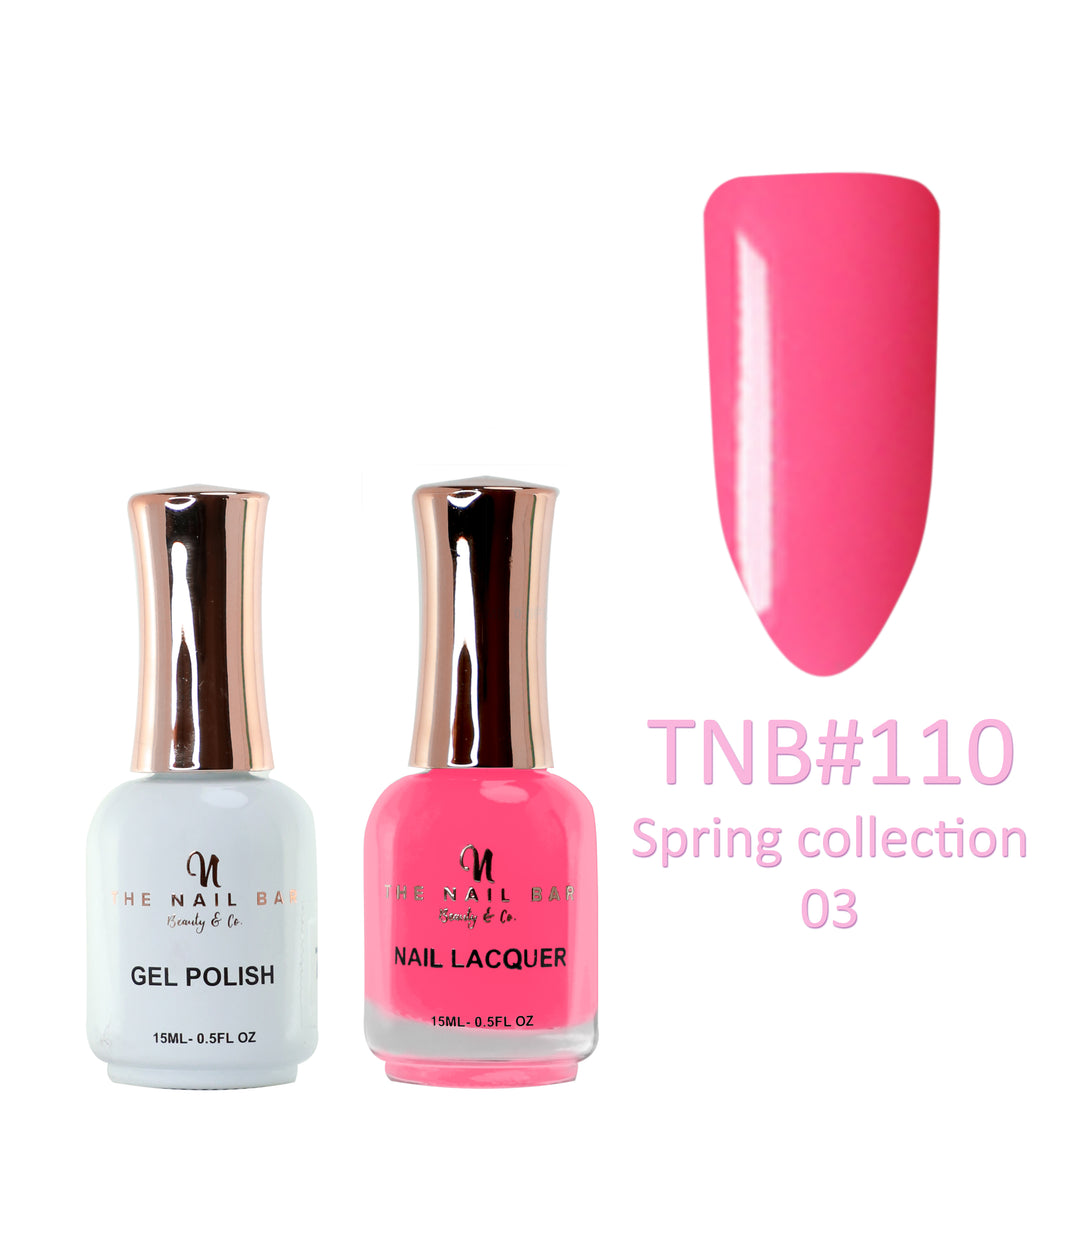 Dual Polish/Gel colour matching (15ml) - Spring collection 03